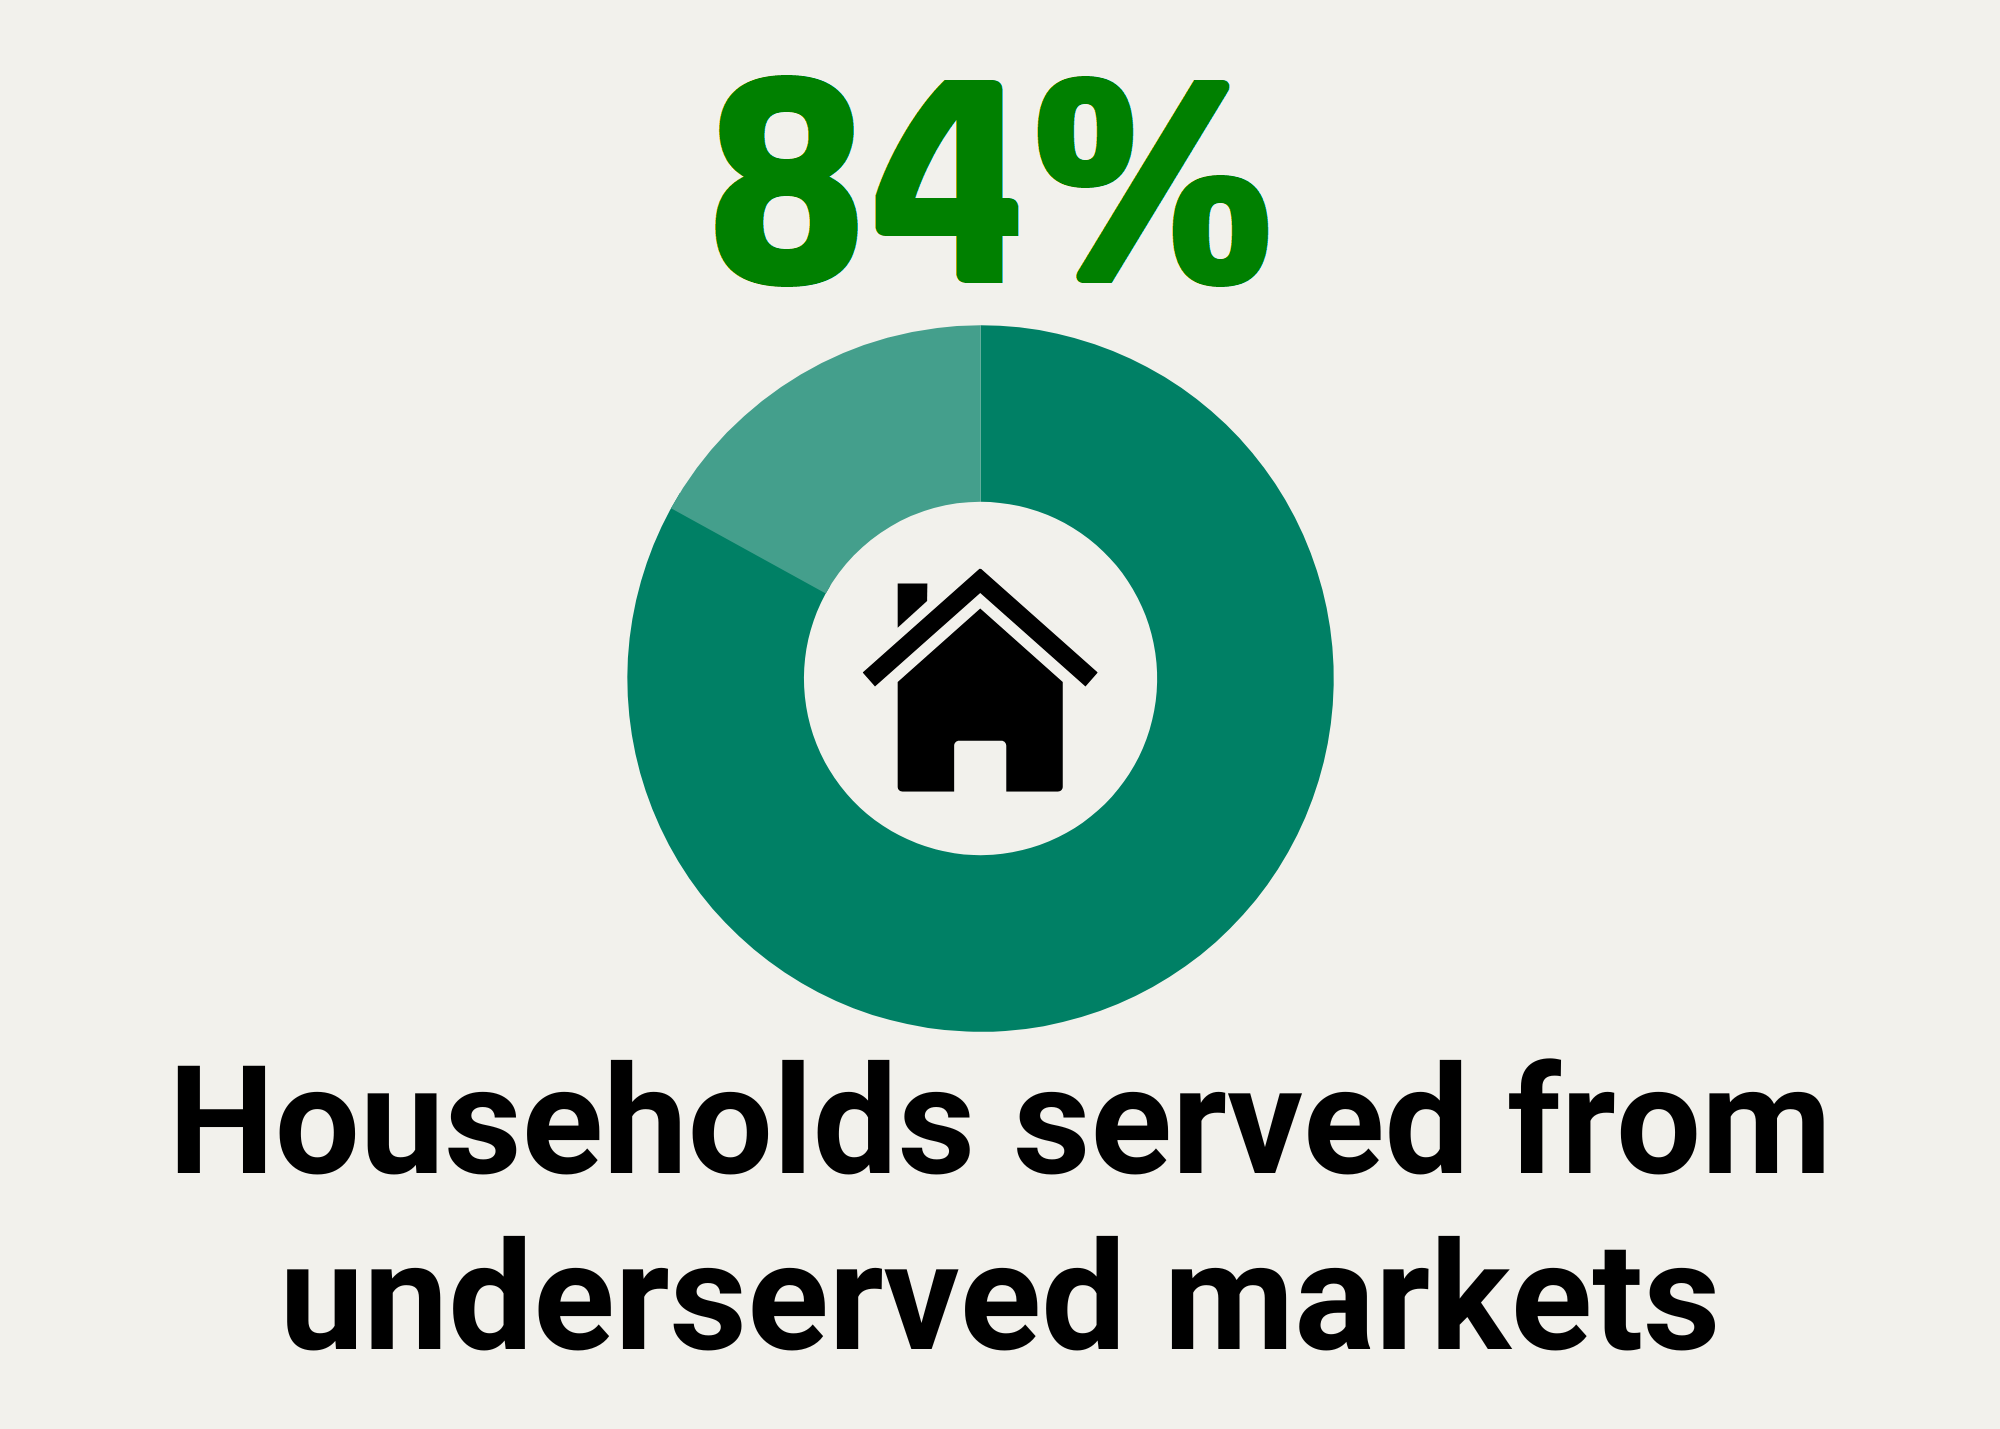 Households served from underserved markets: 84%